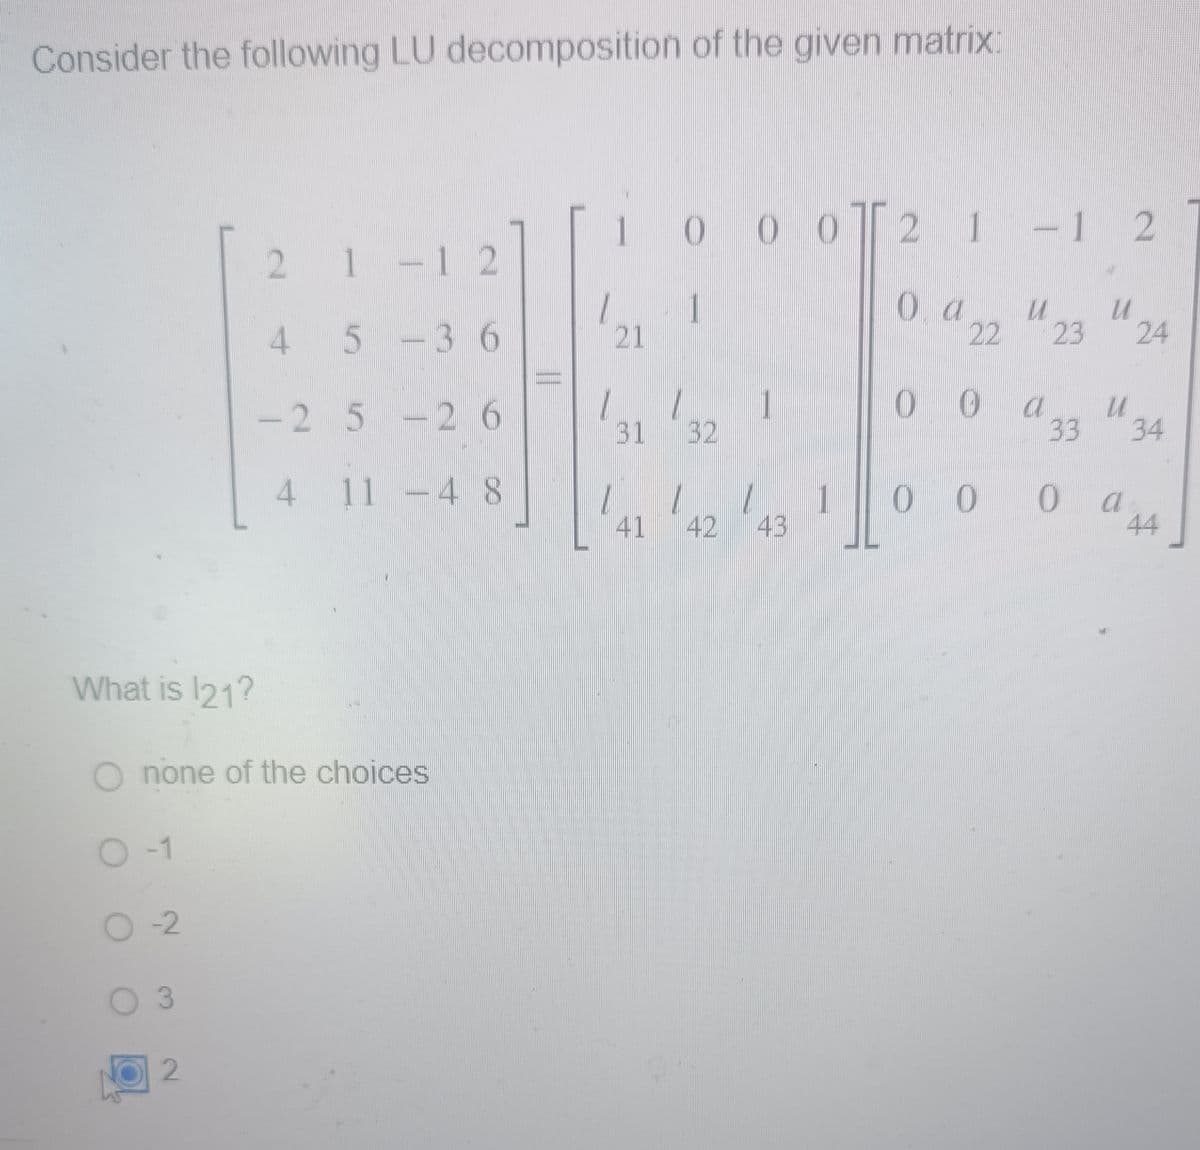 Consider the following LU decomposition of the given matrix:
O -1
What is 121?
O none of the choices
O-2
O 3
2 1 -
1
- 1 2
45-36
-2 5-2 6
4
2
11 -48
1
21
0 0 0 2 1 - 1 2
1
O a u
31 32
41
11
1
00
a
U
23 24
33
34
0 0 0 44
00
a